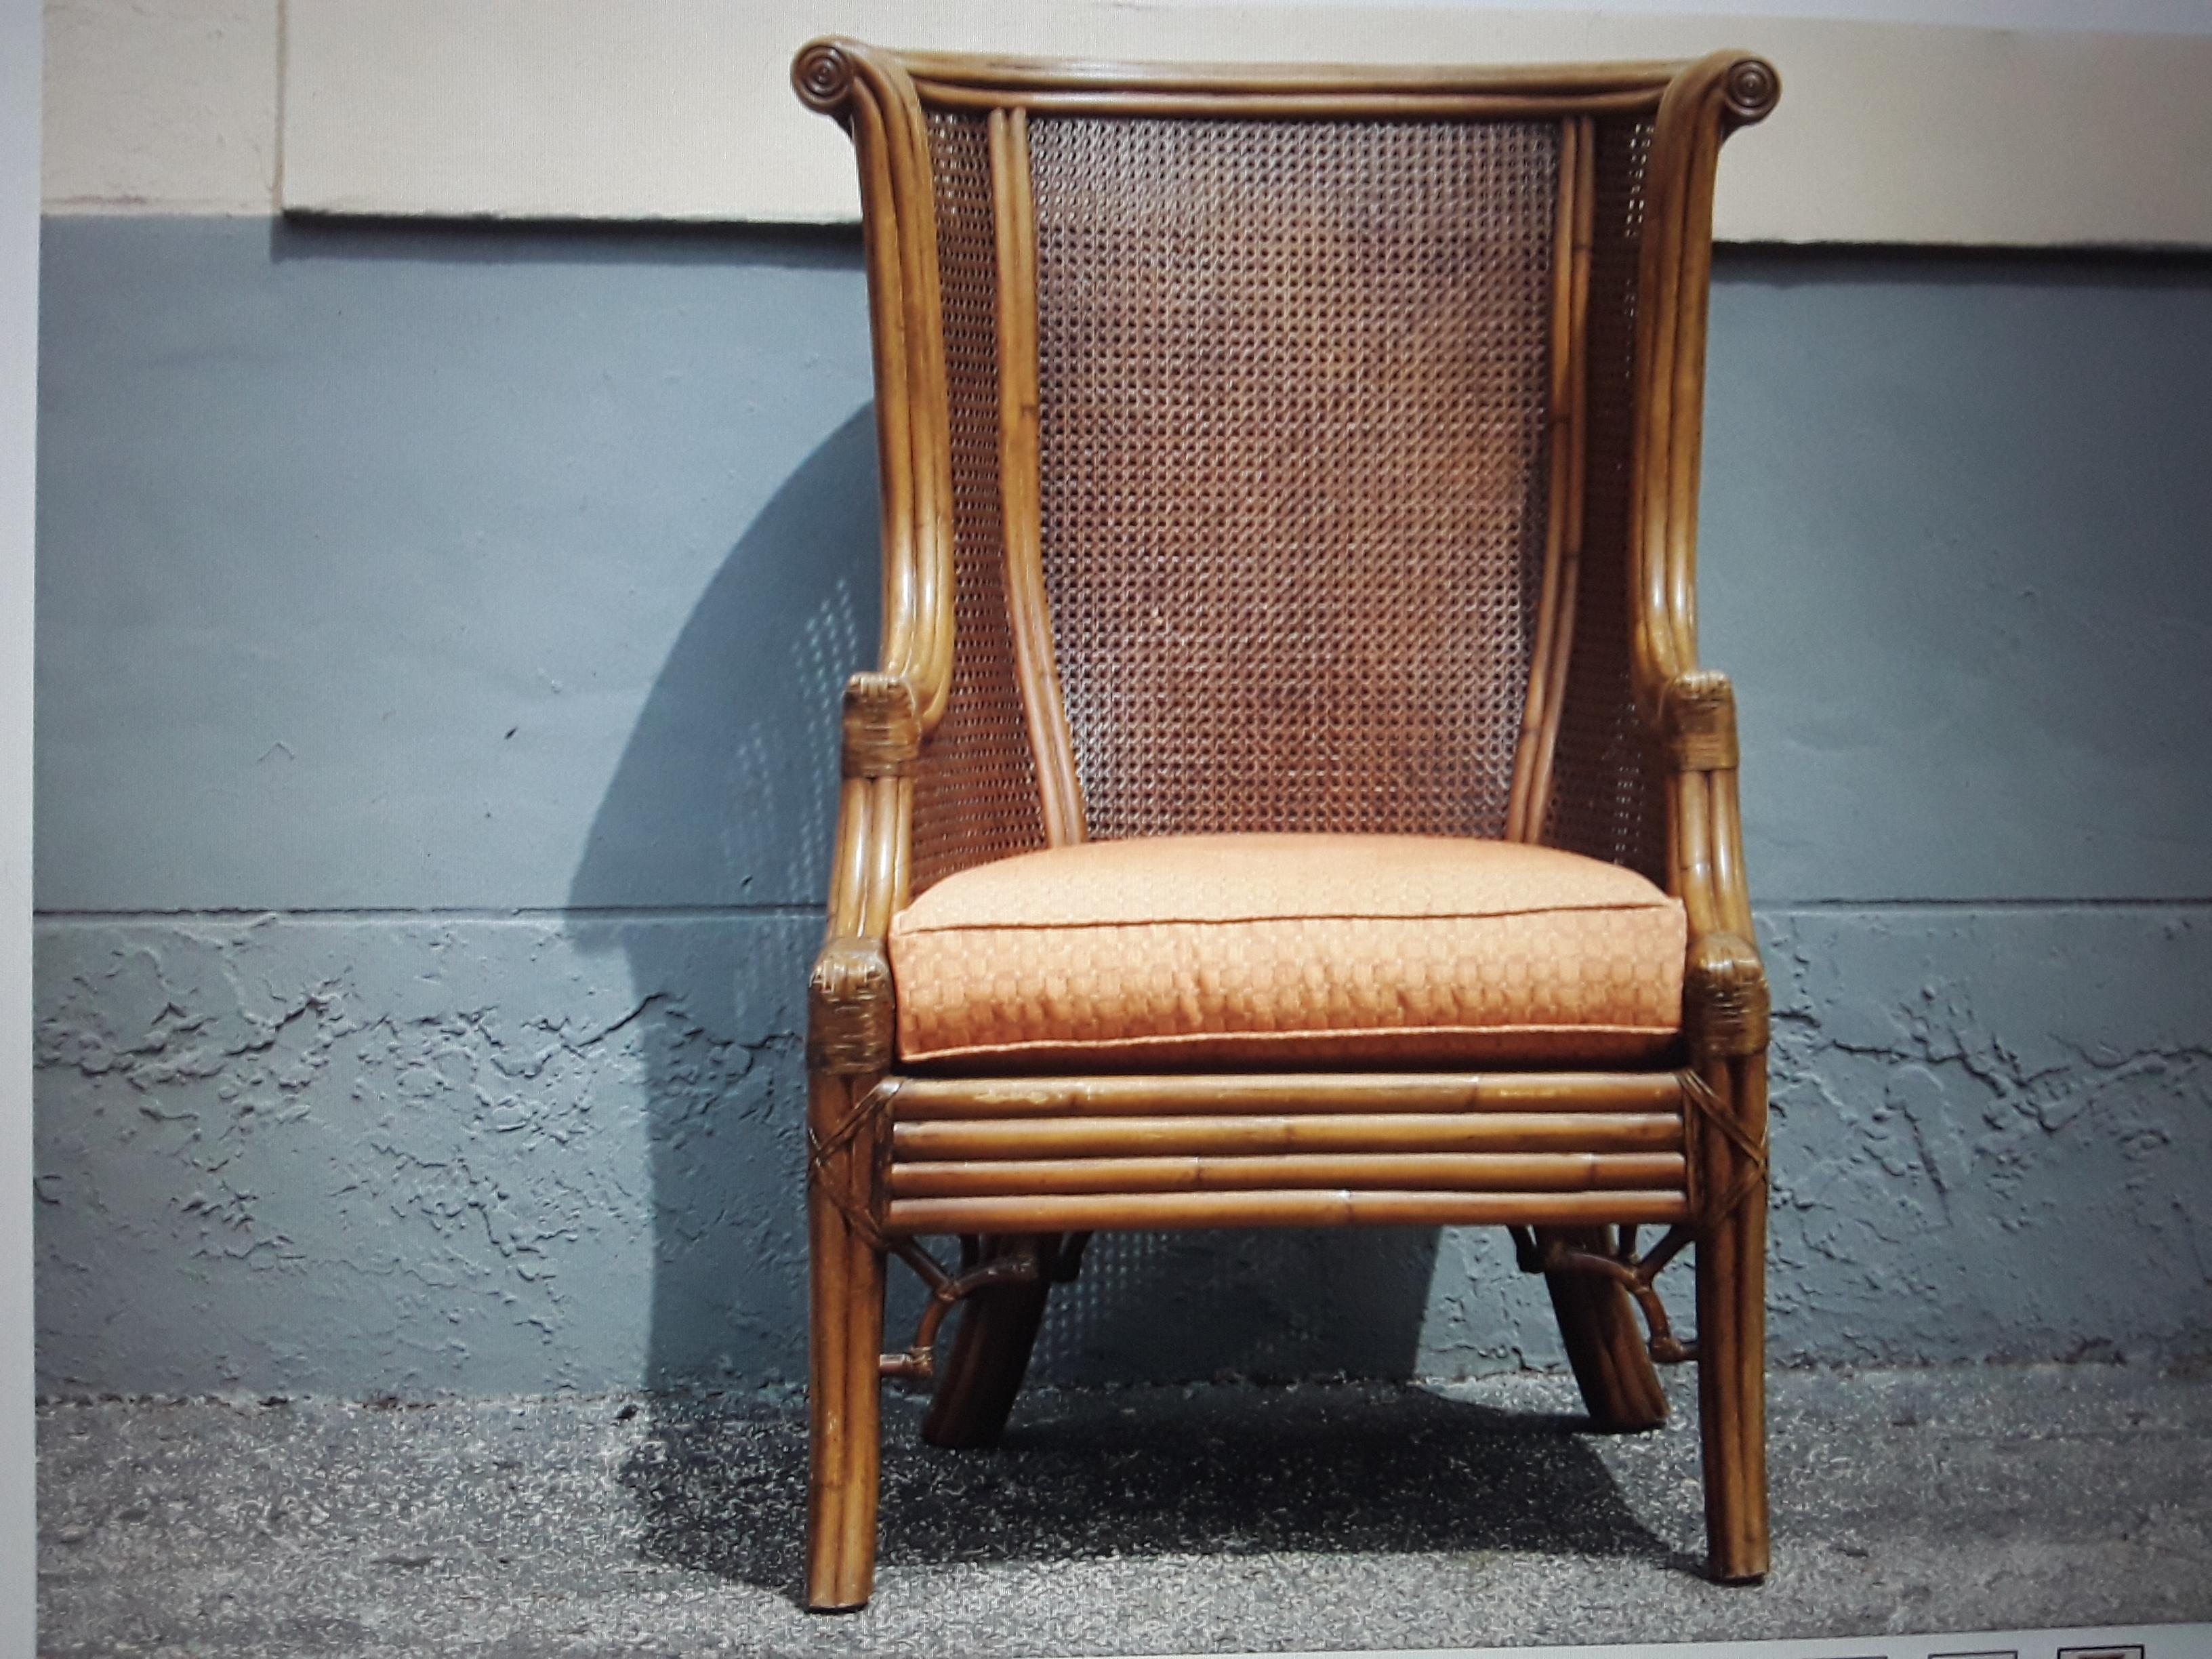 c1960's Mid Century Modern Wingback Chair. Double Caned with Faux Bamboo styled statement Accent Chair. This is a room dominating exceptional chair.